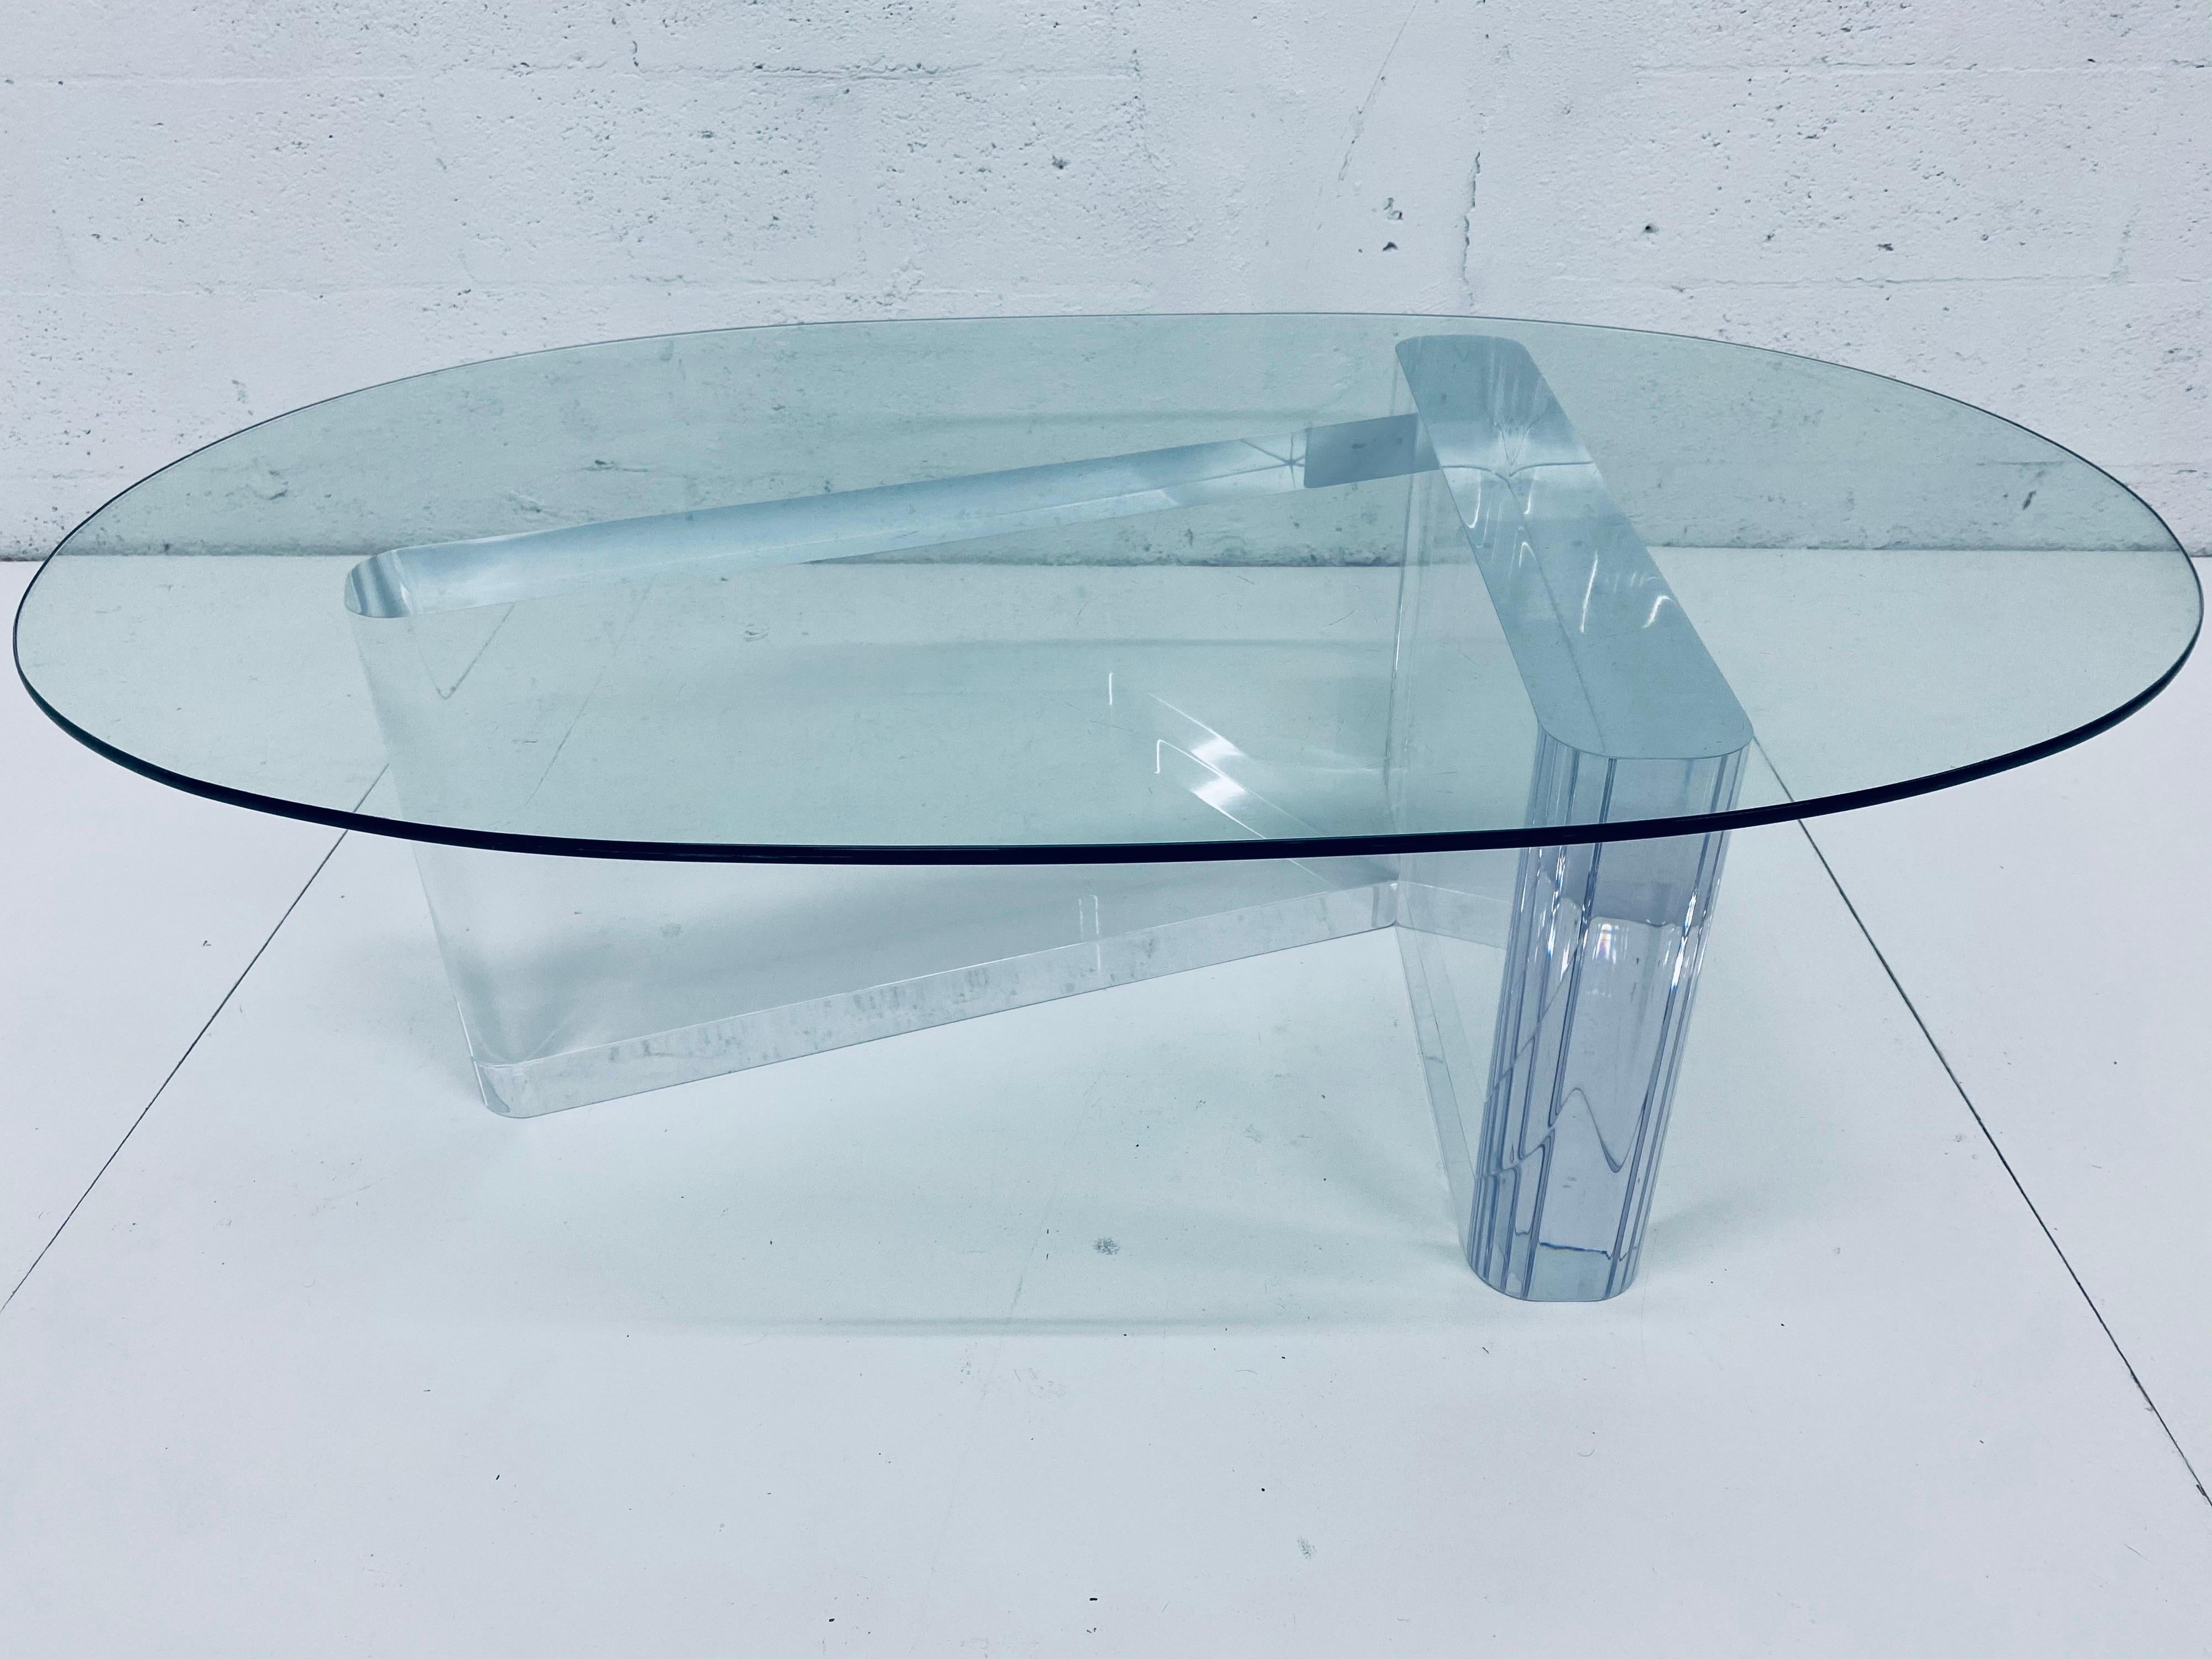 Sculptural Lucite coffee or cocktail table base with oval glass top by Lion In Frost from the 1970s, signed. 

Lucite measures 4 inches thick. Use base with existing glass or have a new piece custom made. We can assist with new glass if required.